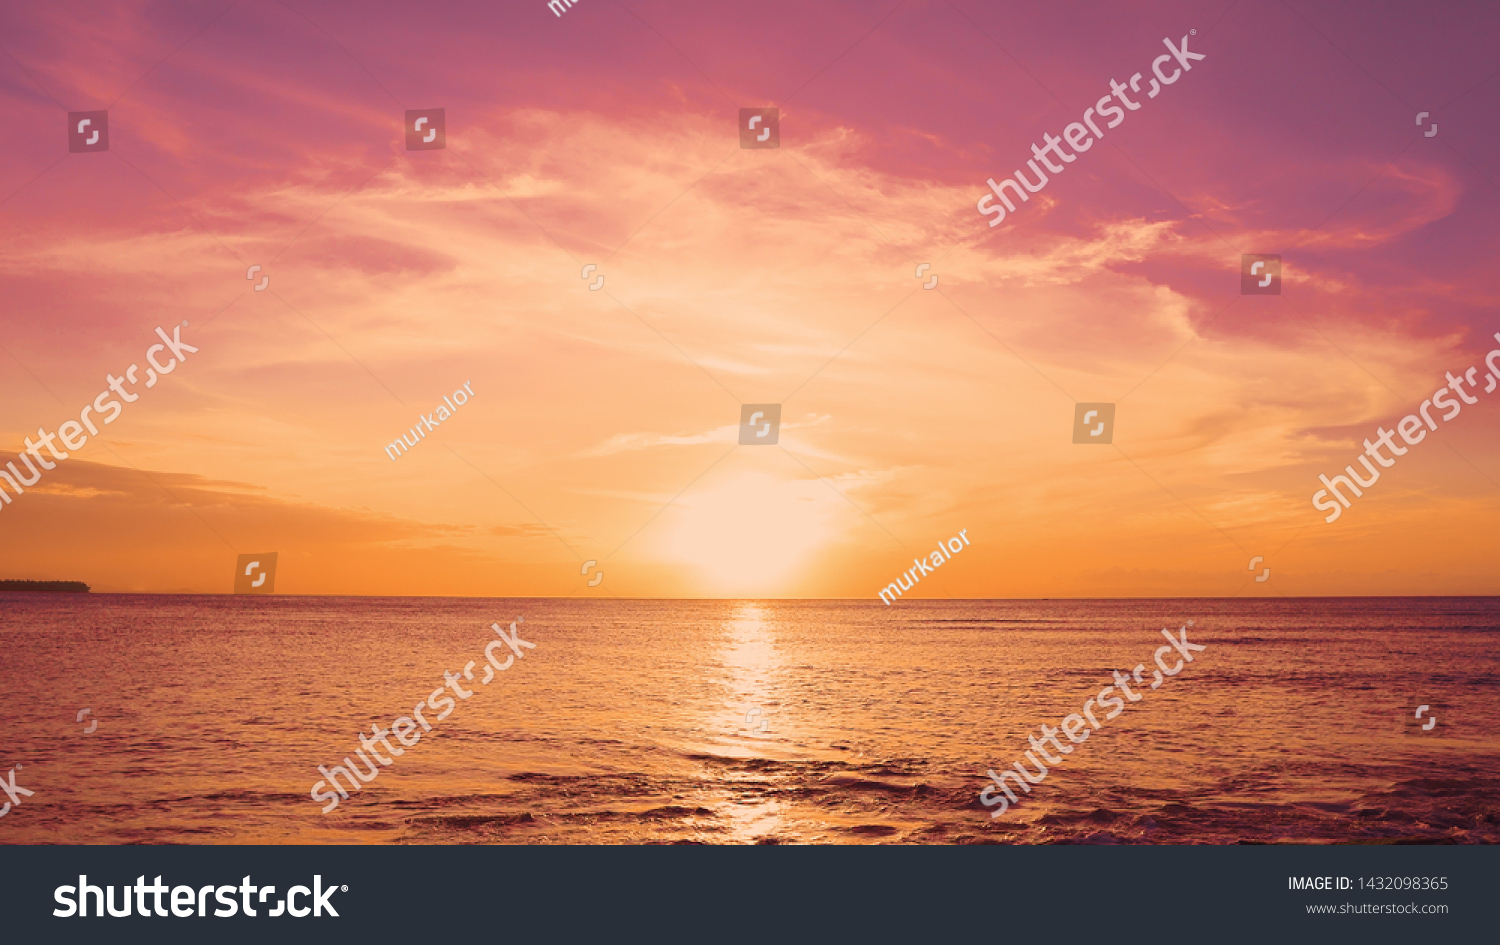 Red sundown sea. The coast of the Caribbean Sea, the yellow sun touches the horizon, beautiful orange clouds around the sun. Amazing view from the beach to the red sundown sea. Beautiful sea landscape #1432098365